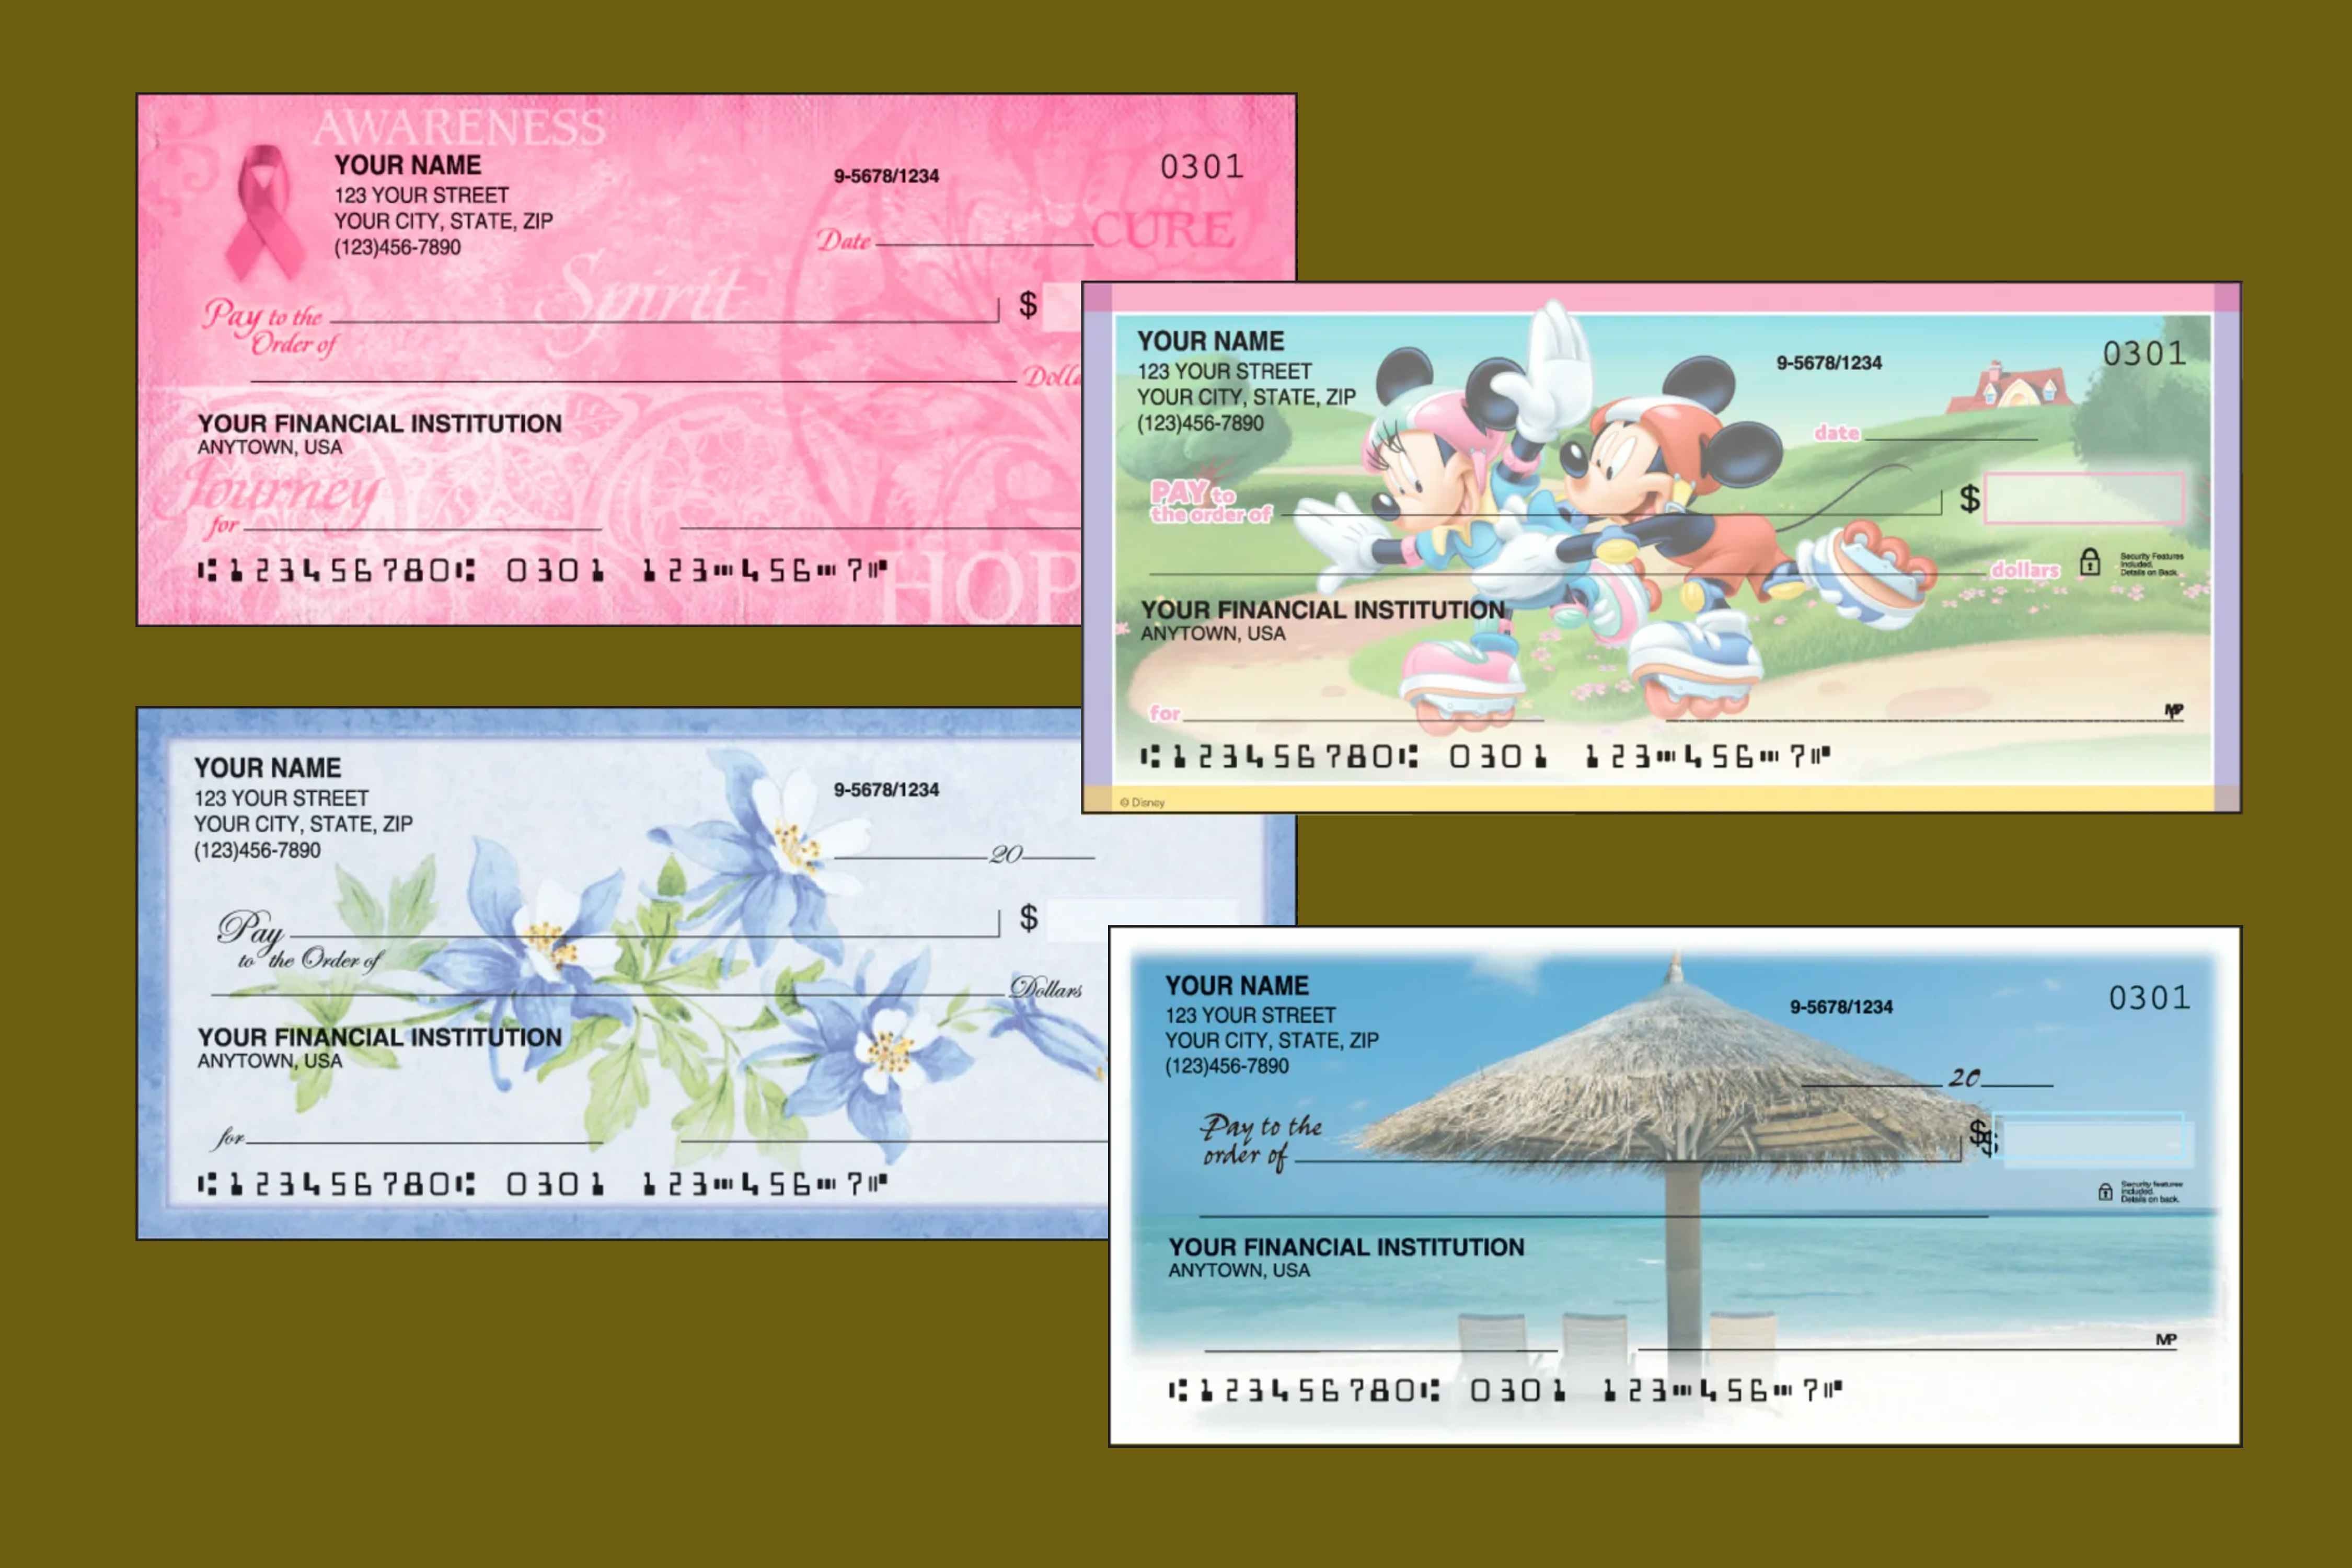 Get 2 Boxes of Personalized Checks for as Little as $4.95